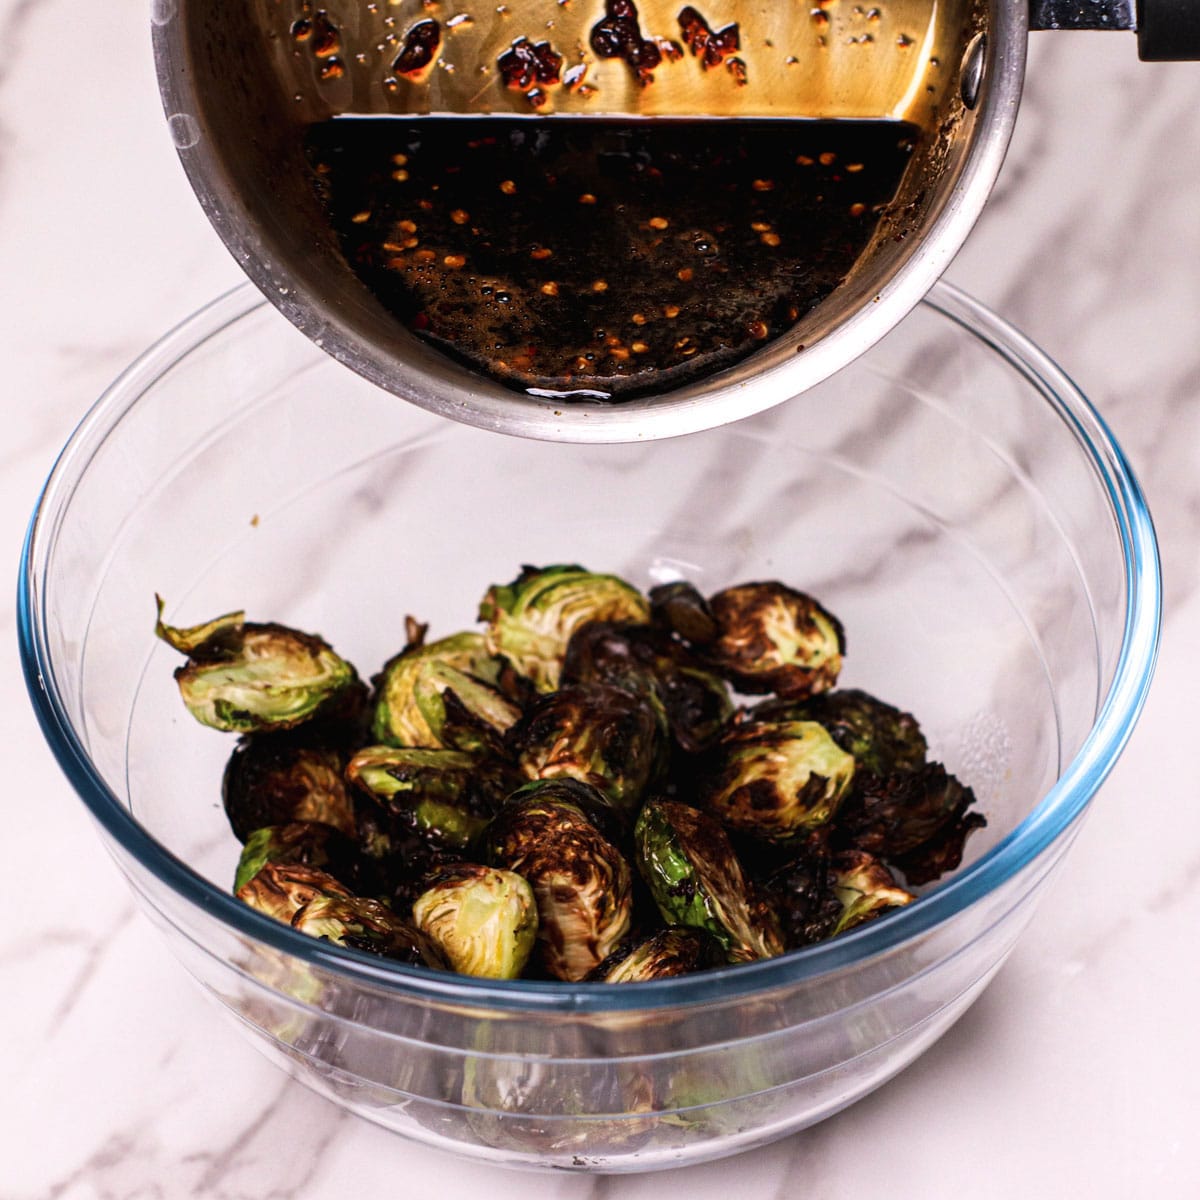 Adding honey garlic sauce to roasted Brussels sprouts.